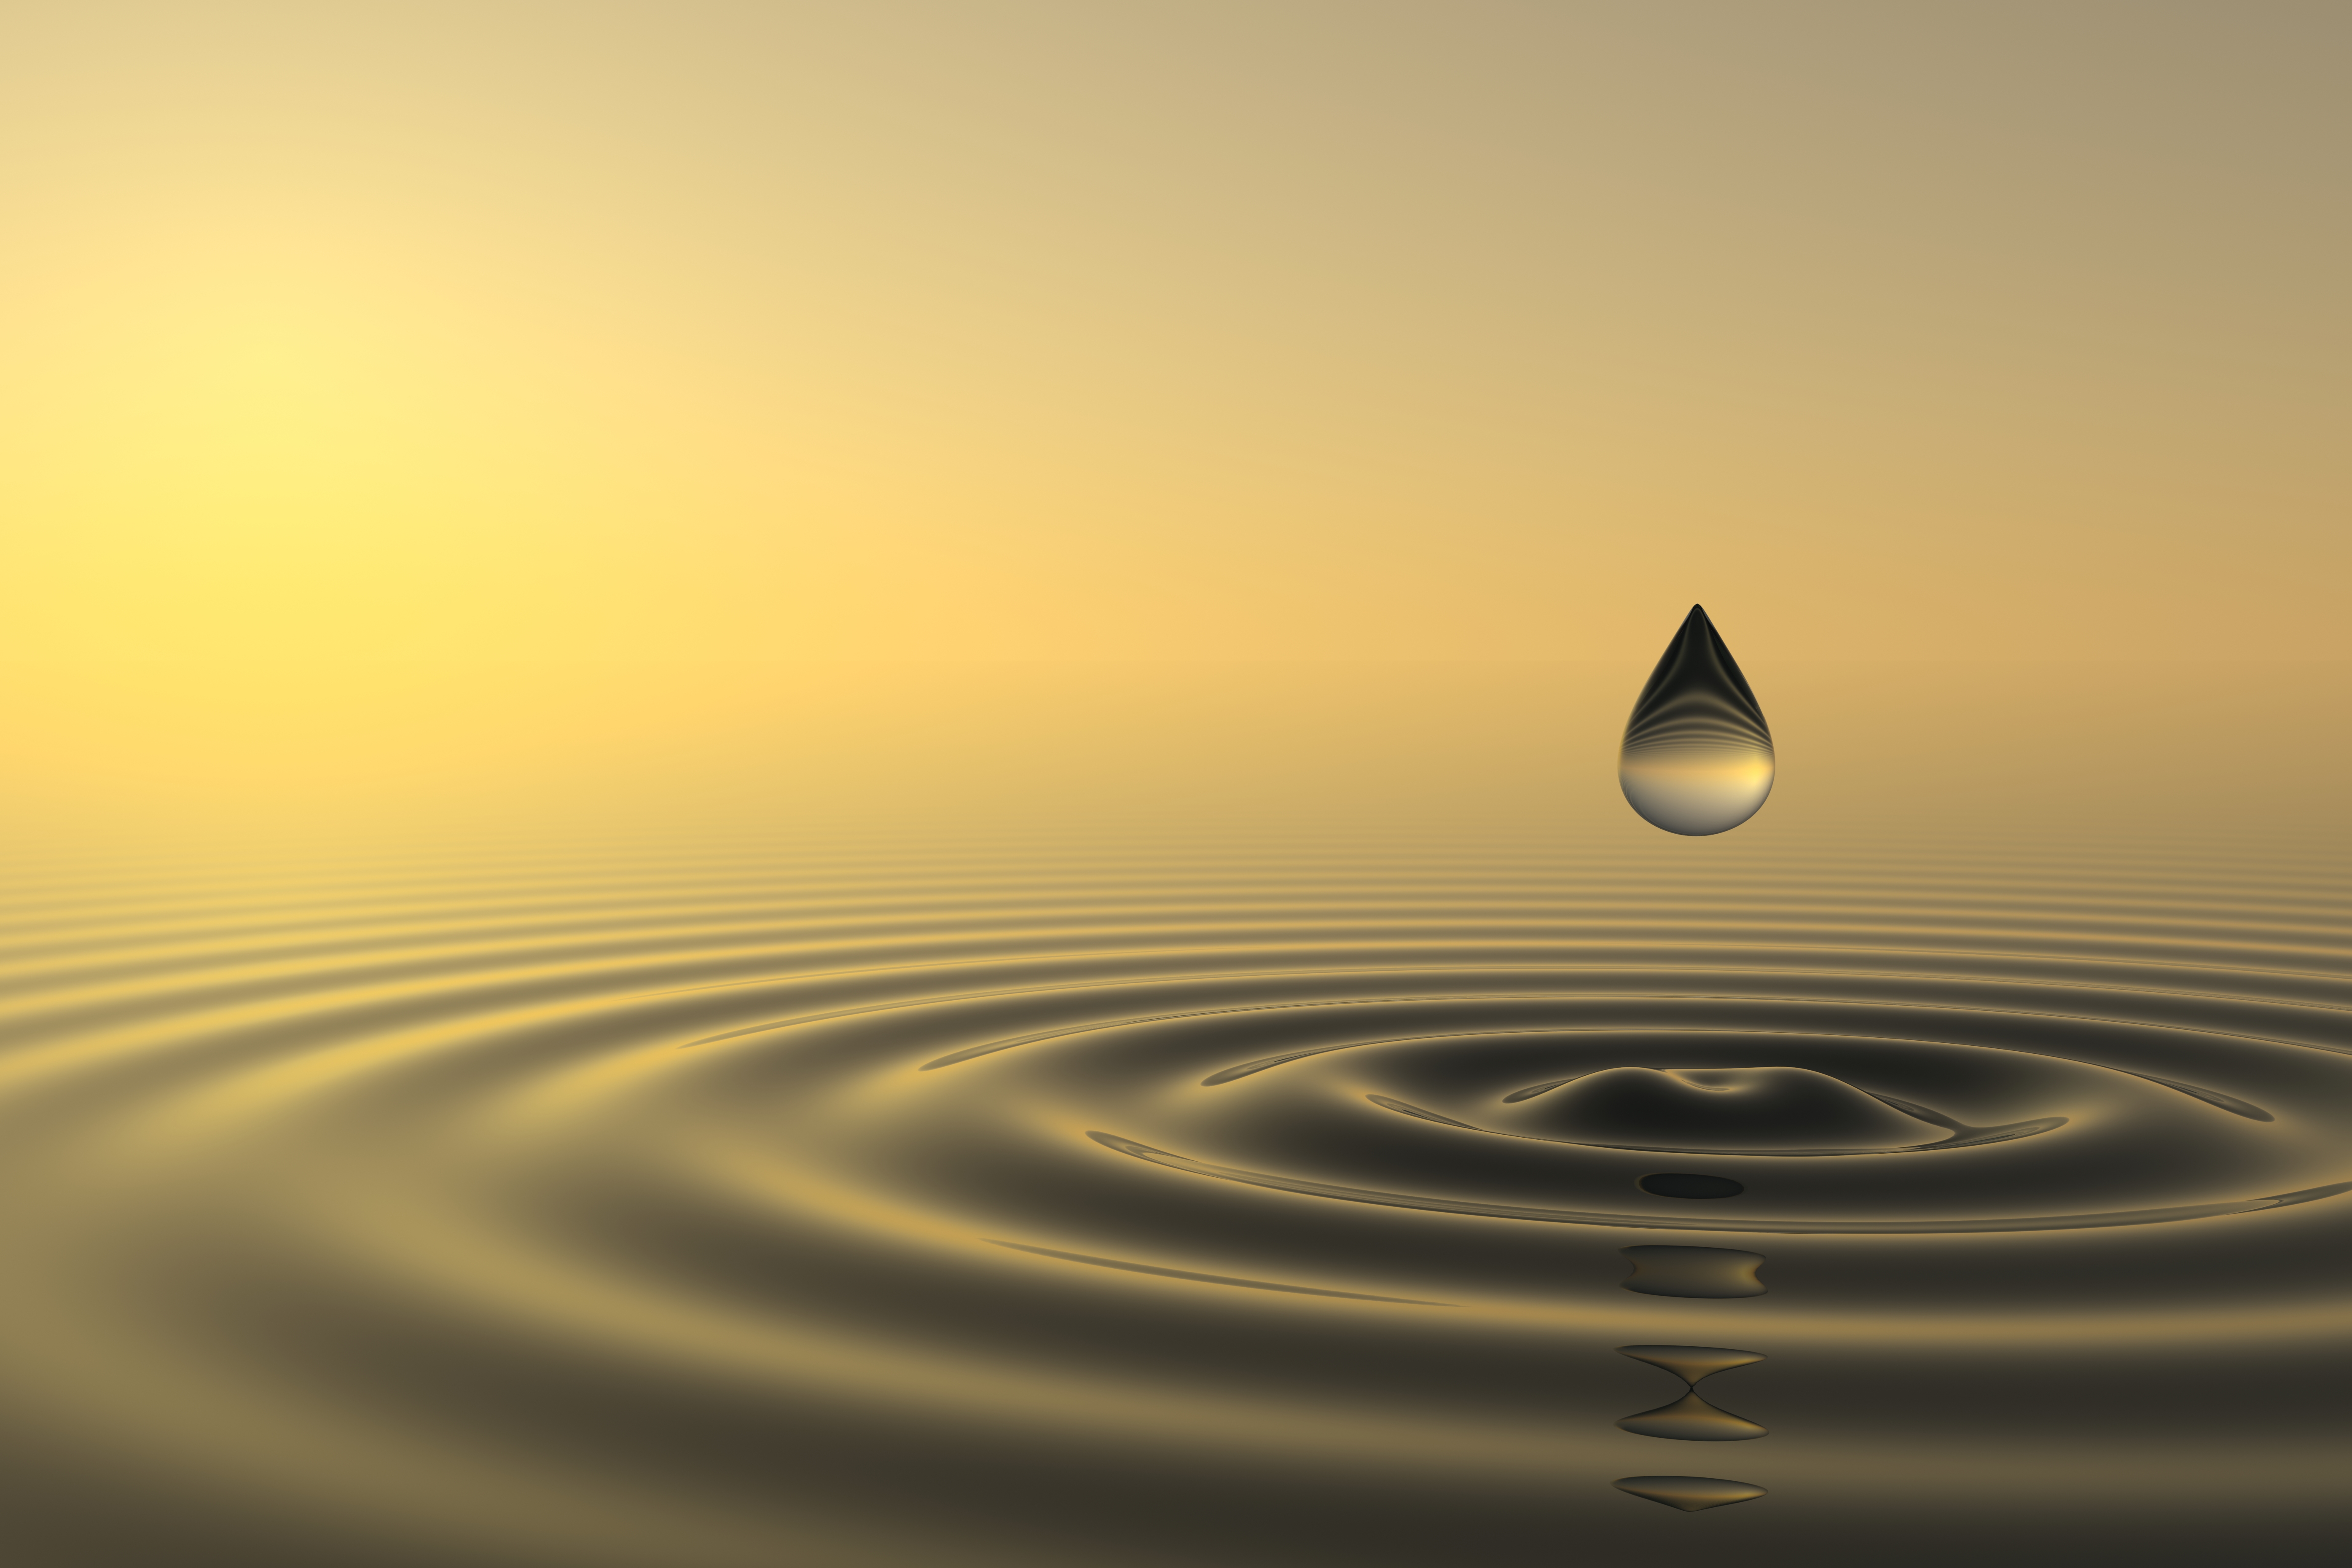 Mindfull graphic - drop of water creating ripples on otherwise smooth surface.